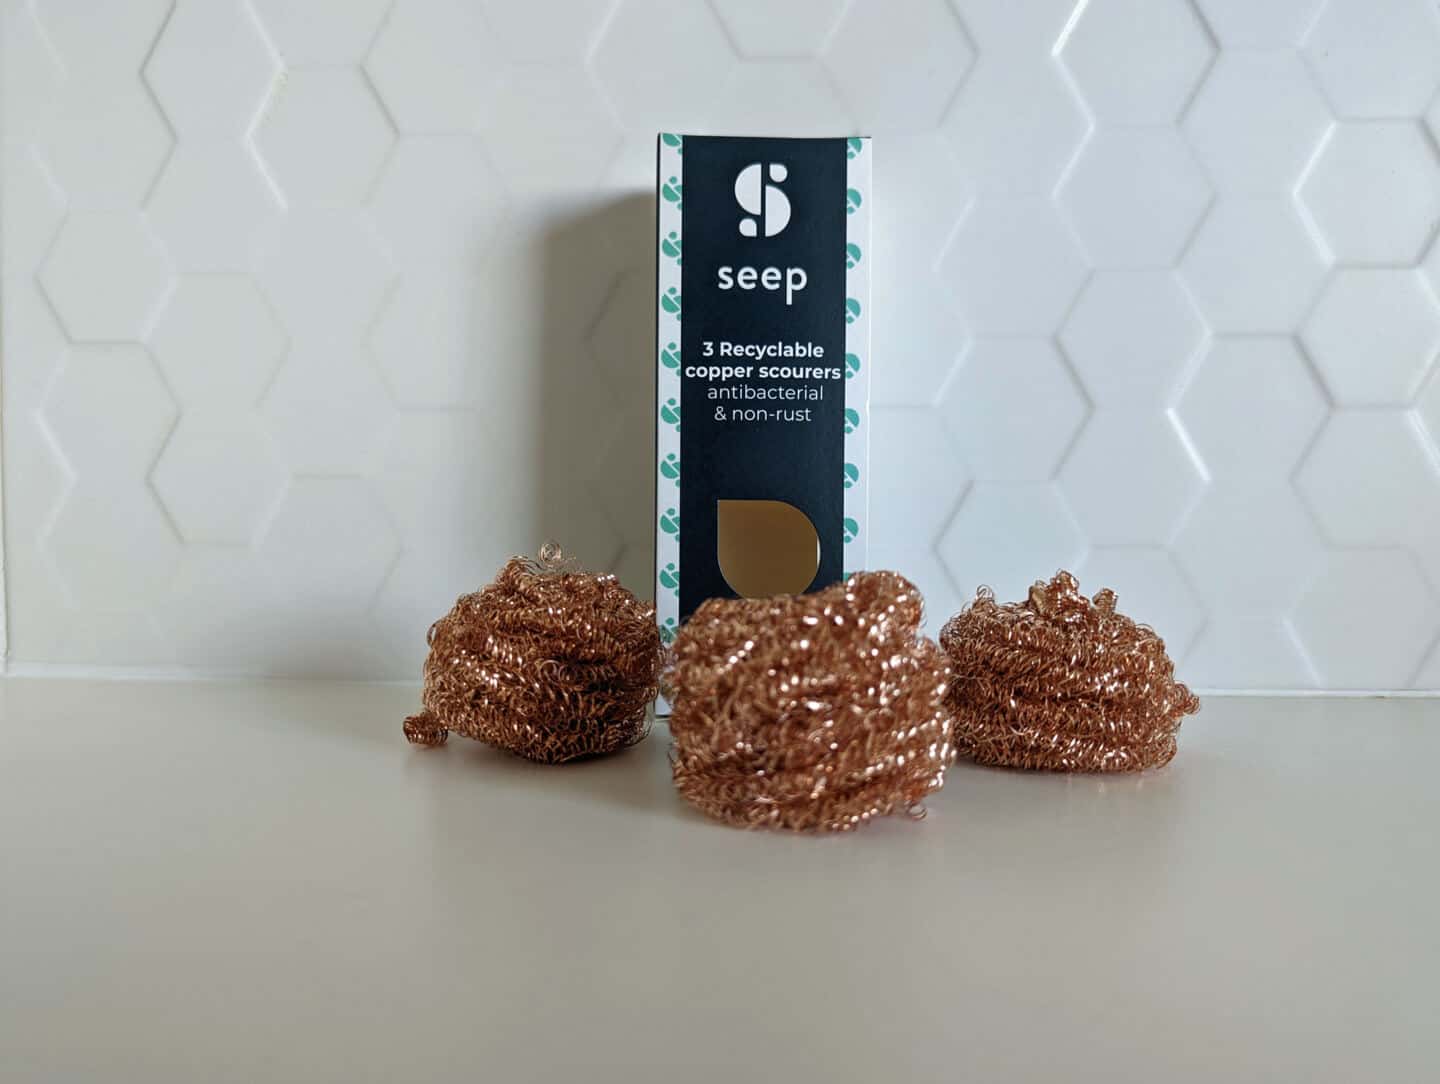 3 recyclable copper scourers from Seep on a white worktop with white tiles behind